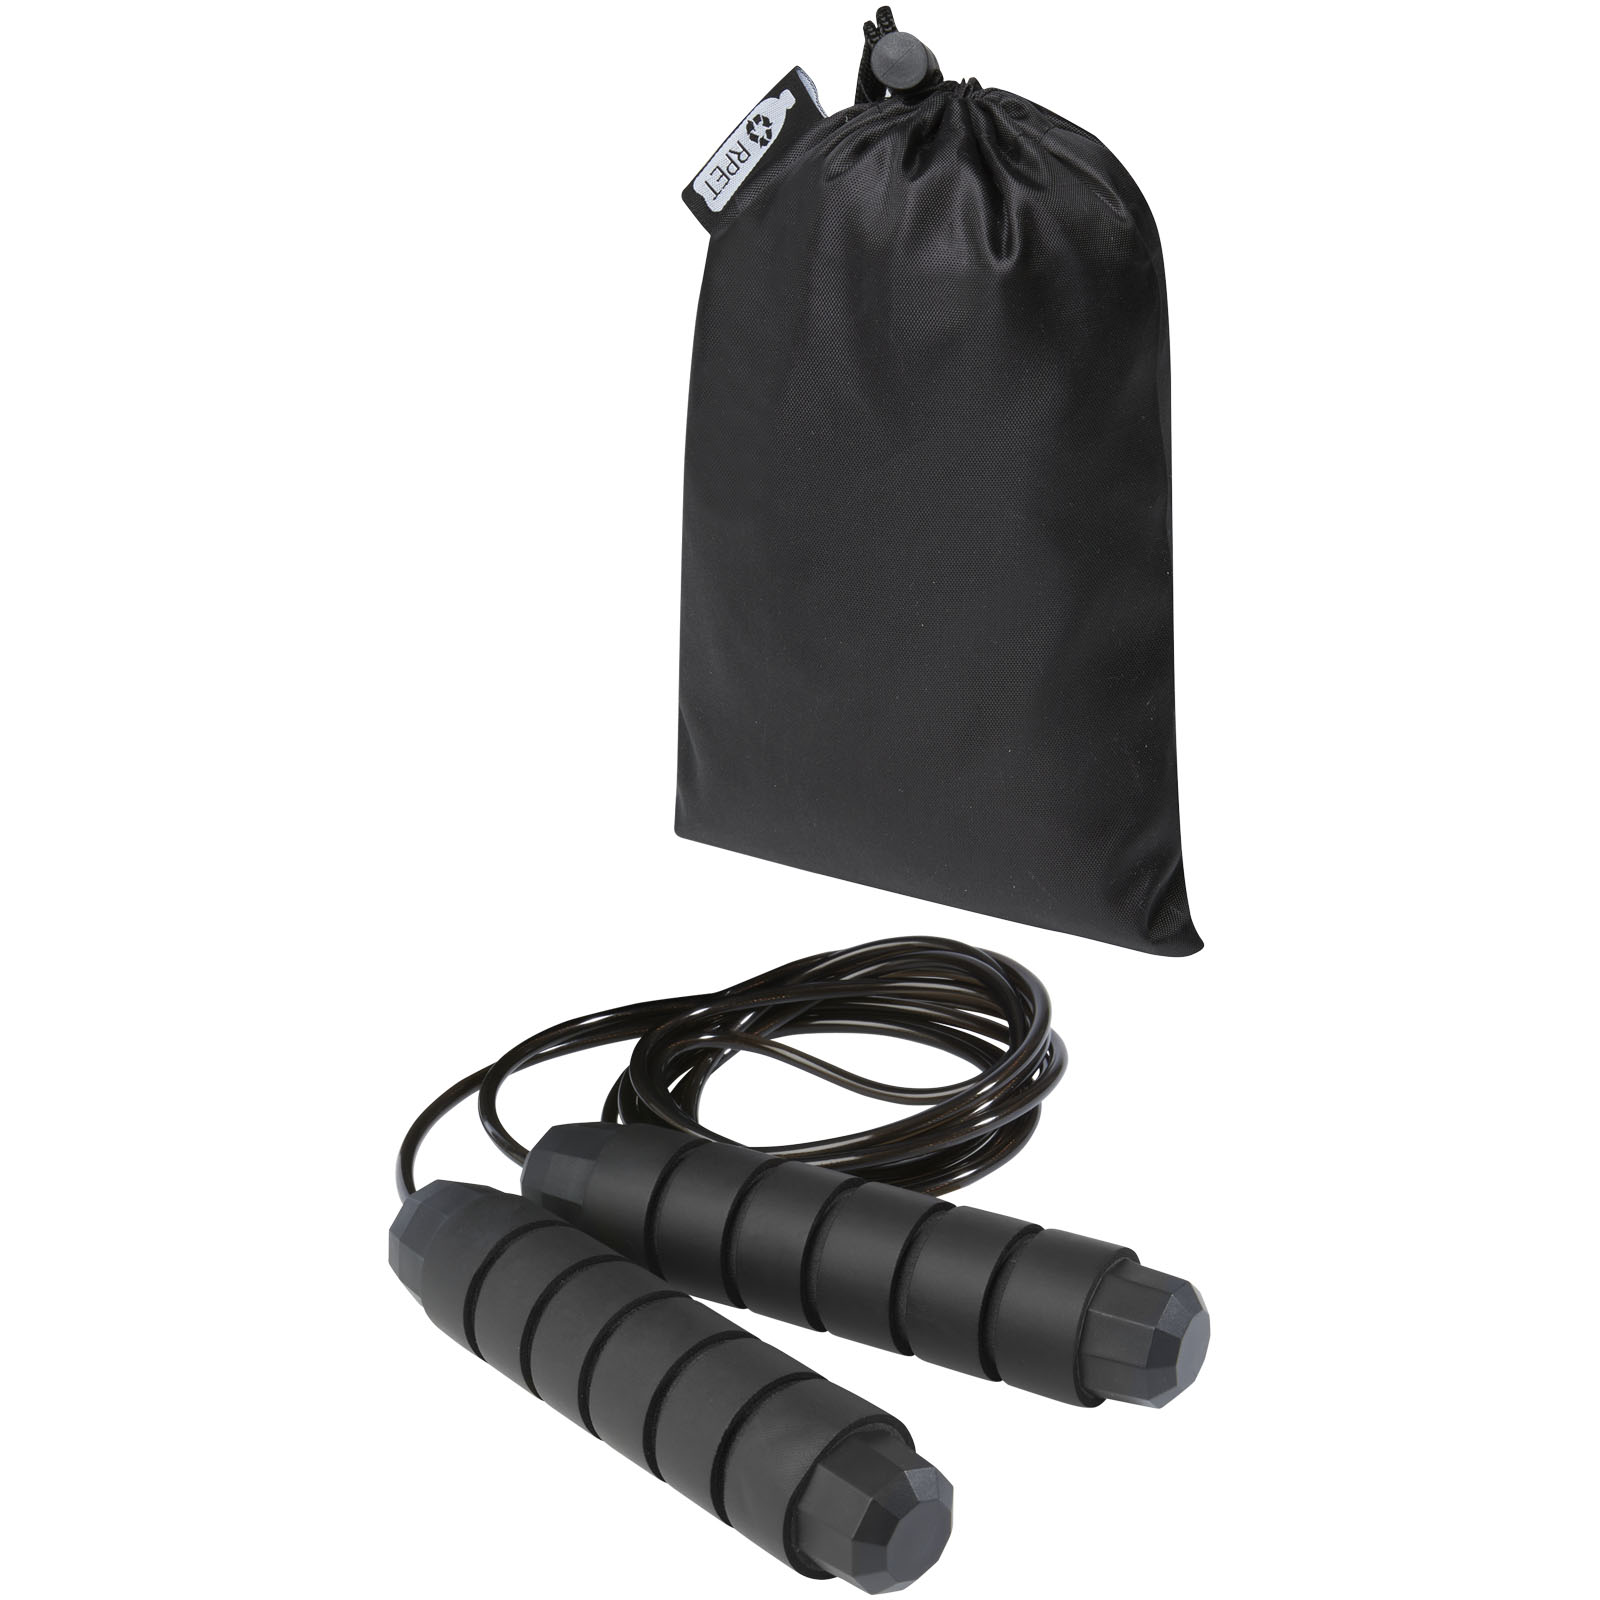 Professional jump rope XING in recycled material case